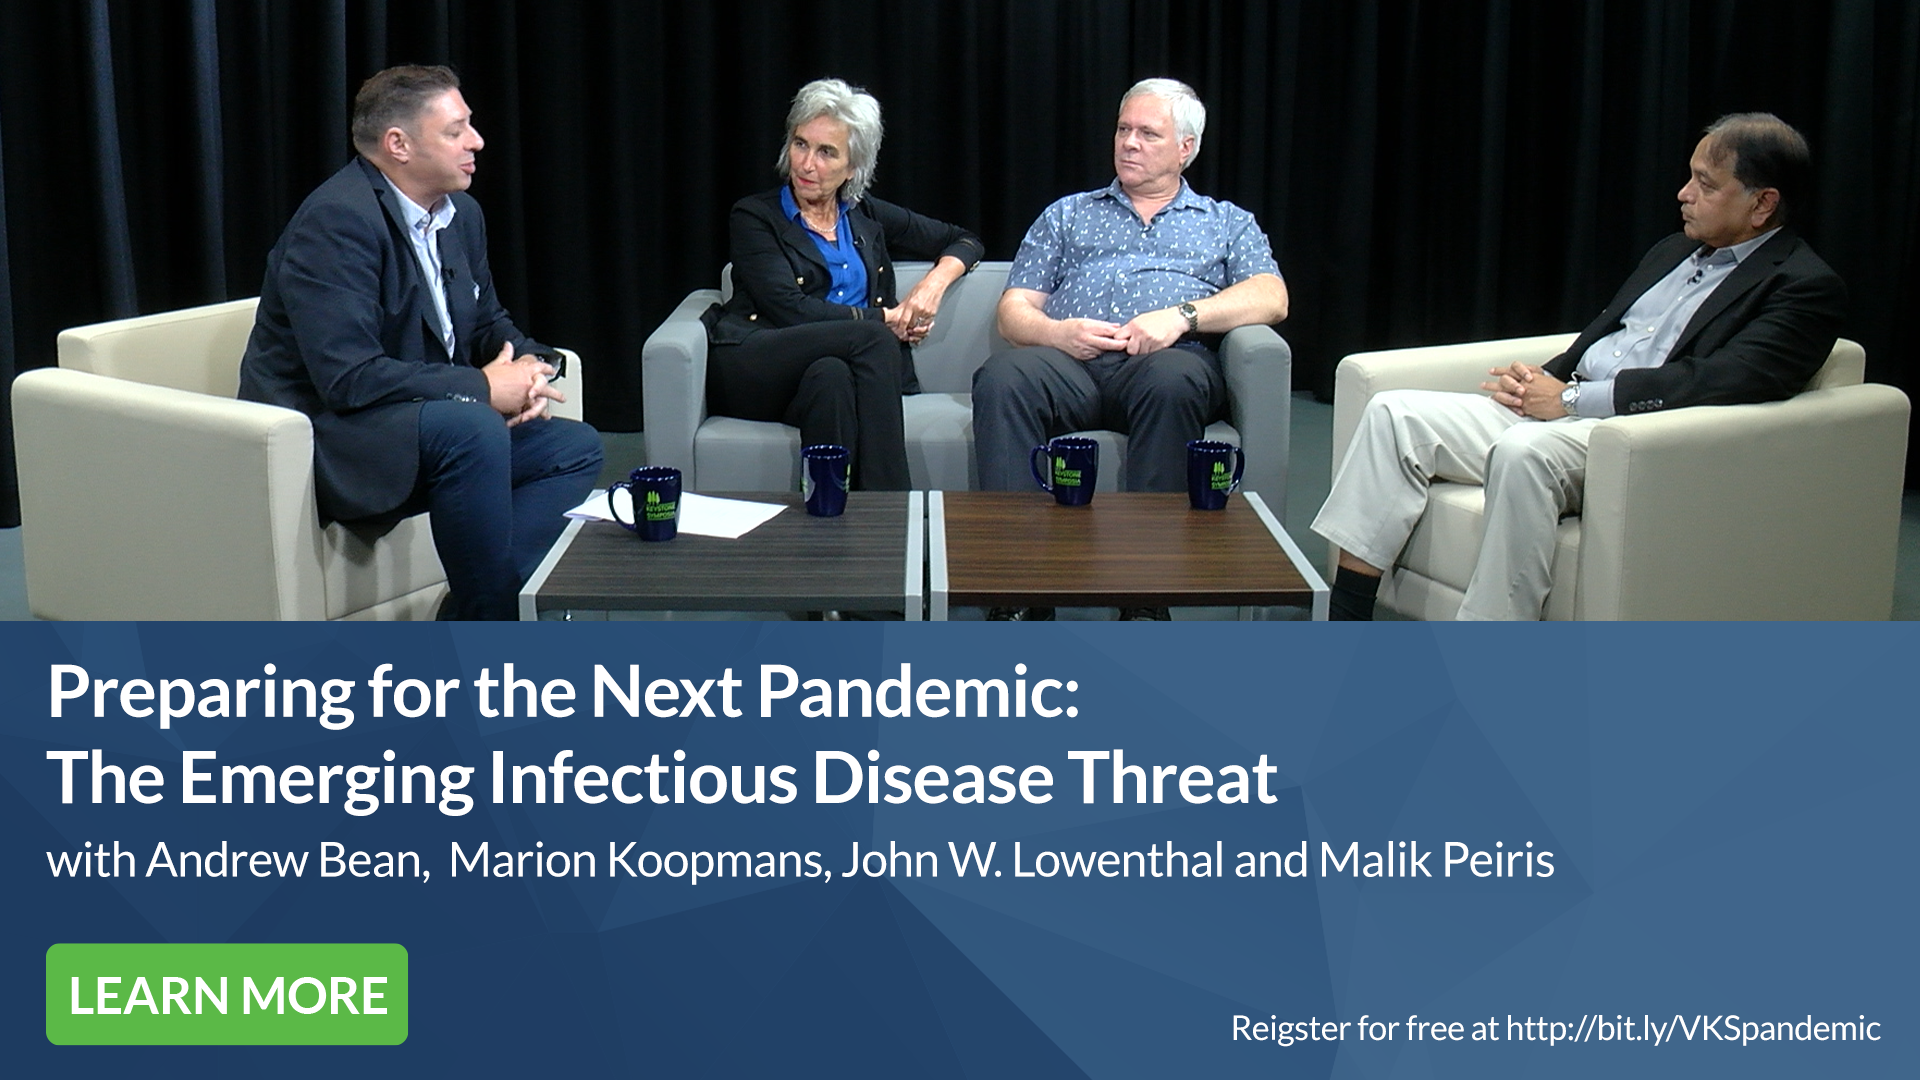 Virtual Keystone Symposia roundtable: Preparing for the Next Pandemic: The Emerging Infectious Disease Threat